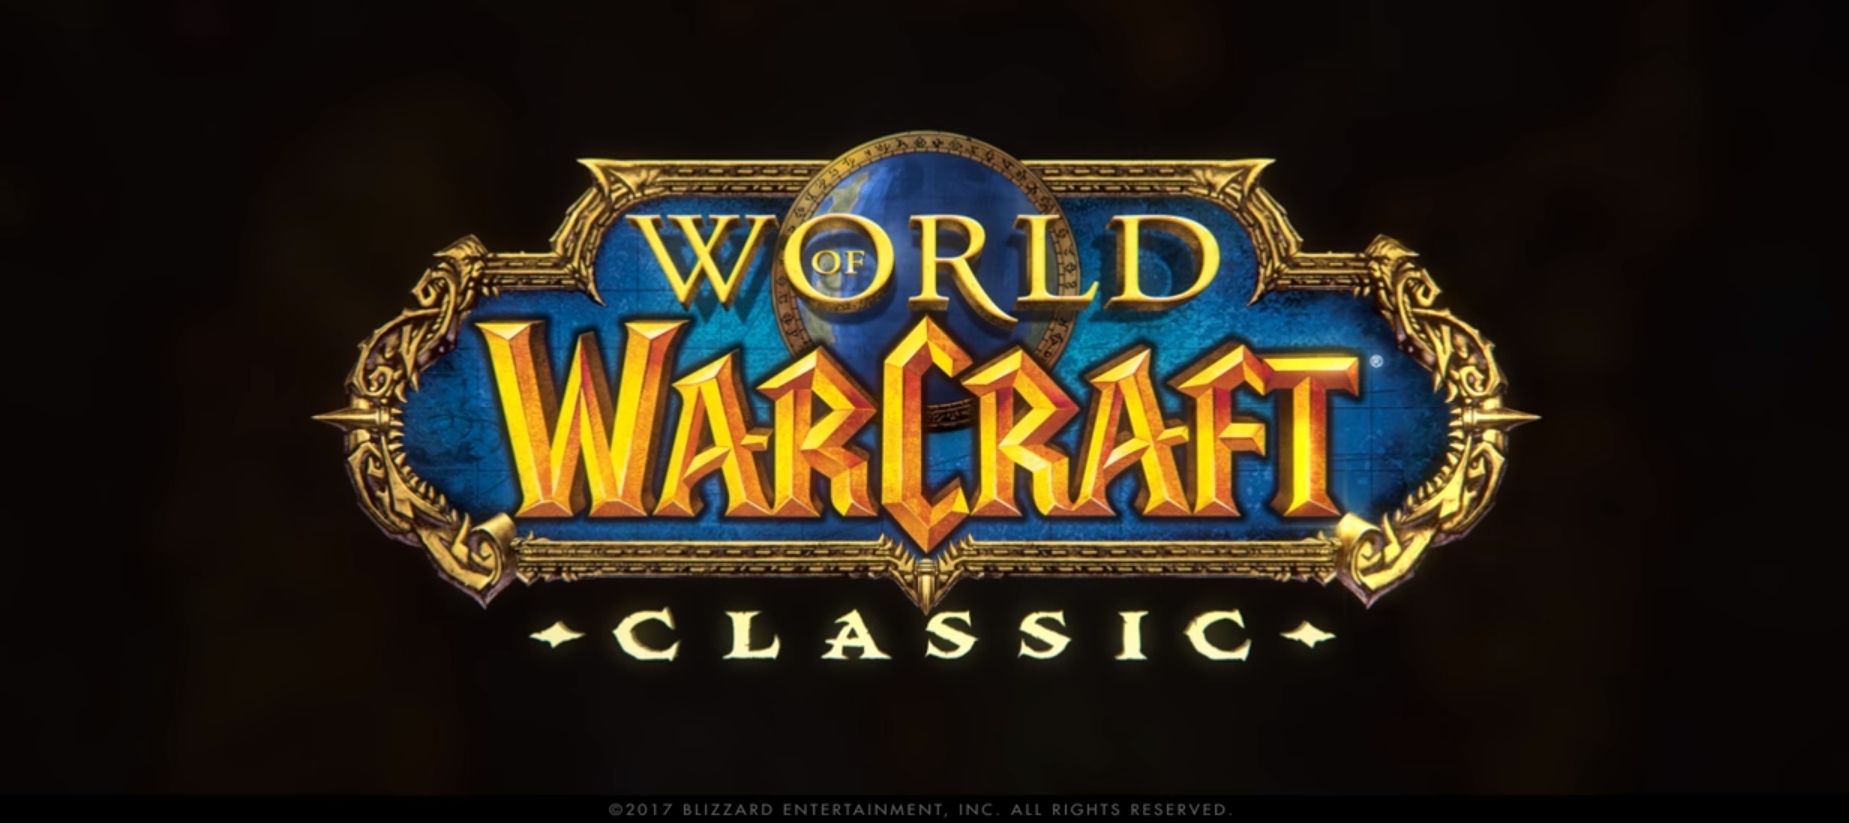 Recent Blizzard Changes Leave Community Questioning Future Of World Of Warcraft: Classic